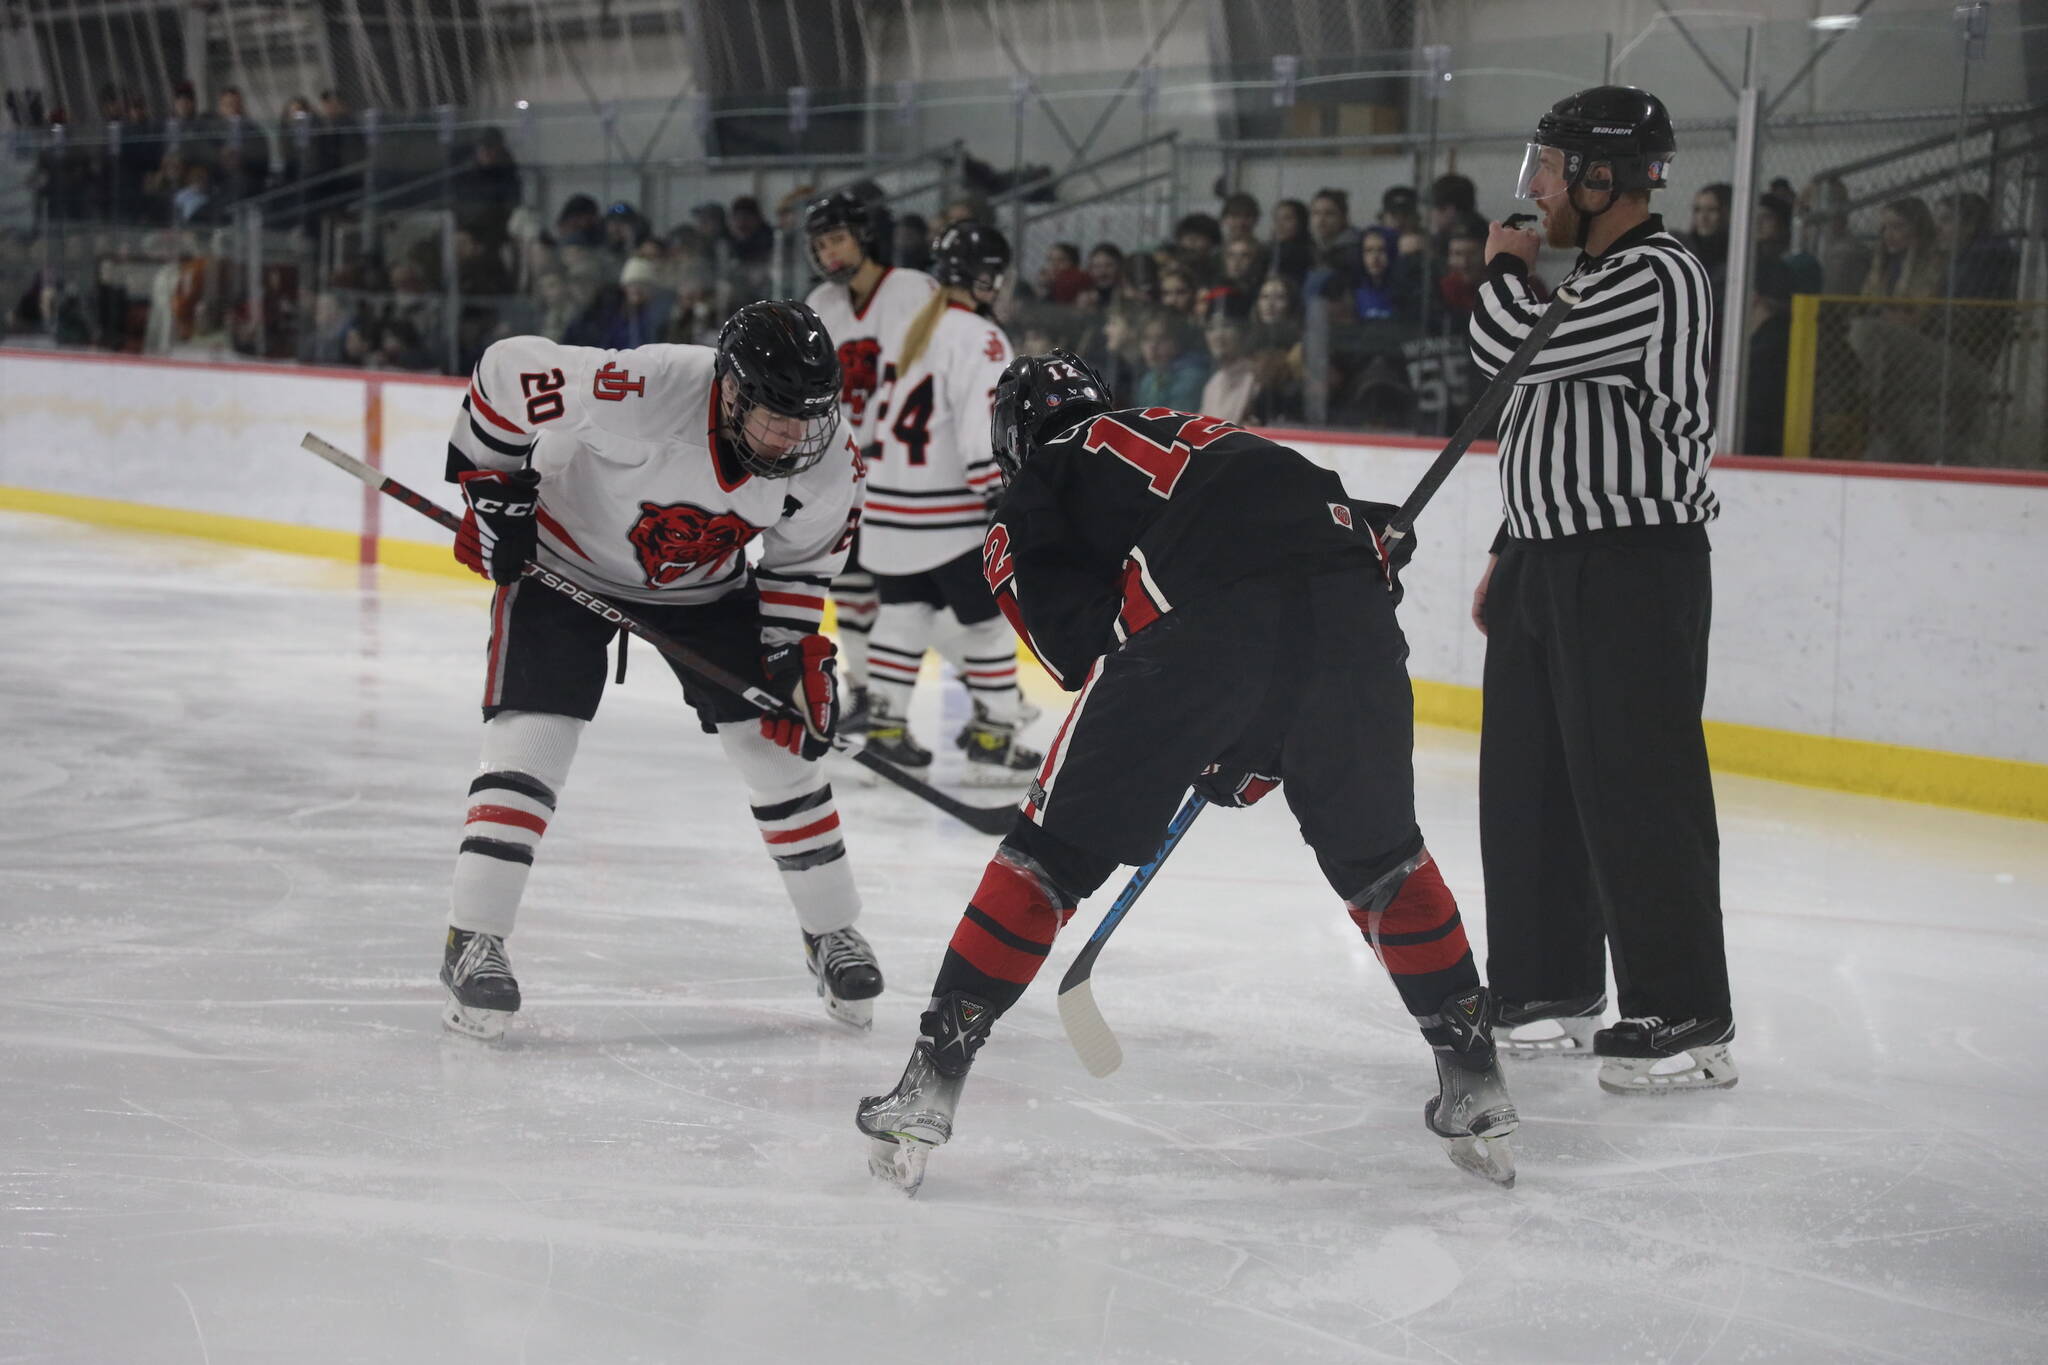 Senior and team assistant captain Brandon Campbell faces off during a home game between Juneau-Douglas High School: Yadaa.at Kalé Crimson Bears Varsity hockey team and the Kenai Central Kardinals at the Treadwell Arena Saturday afternoon. (Clarise Larson / Juneau Empire)